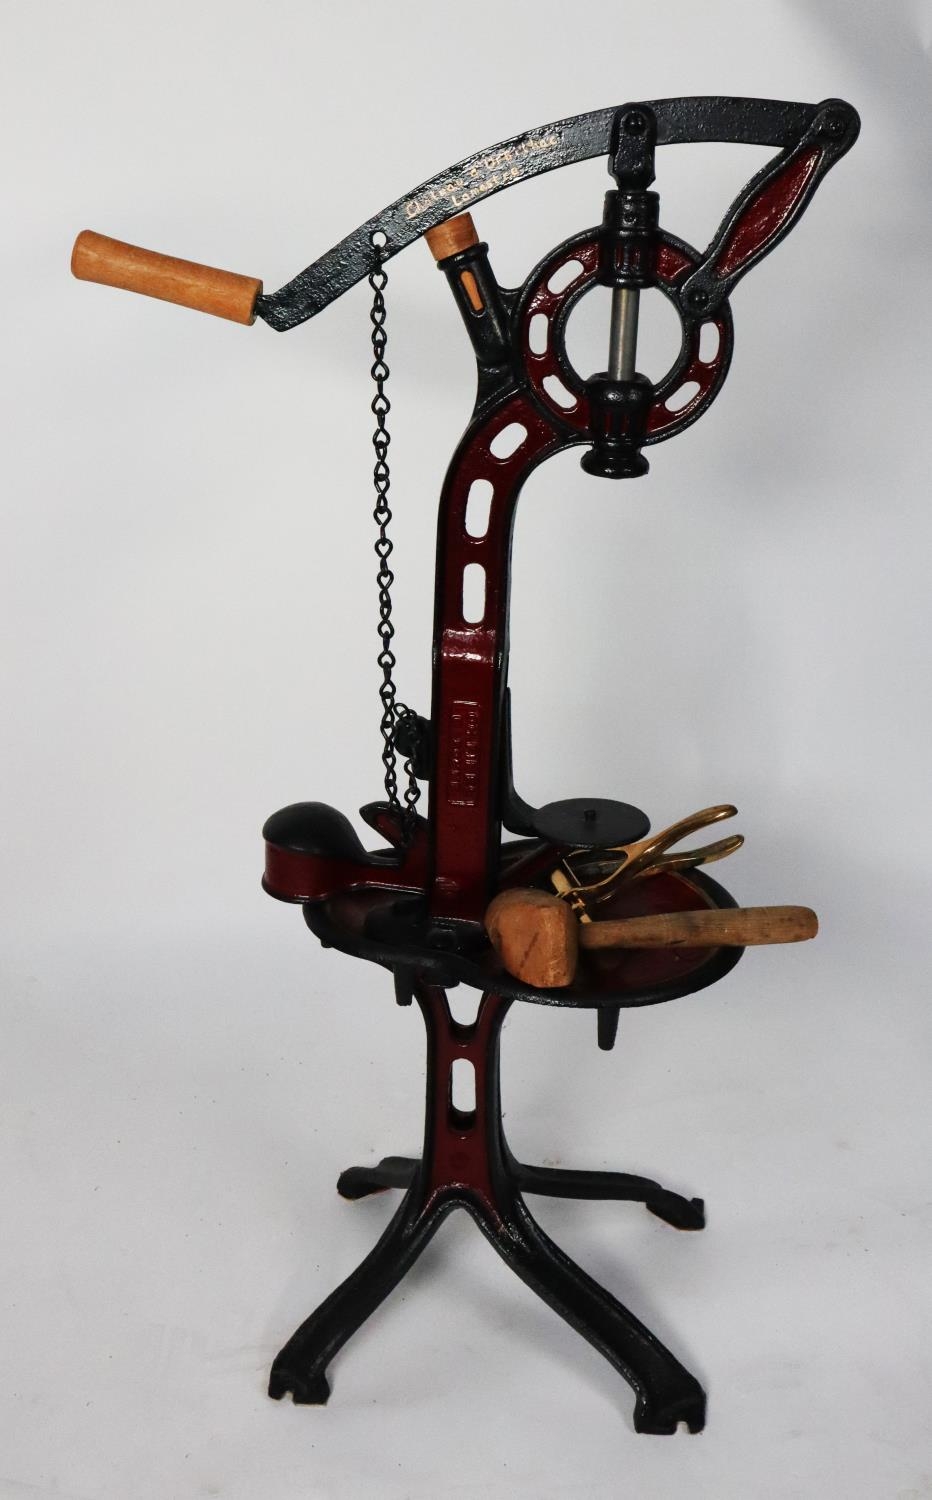 ‘CHARLES PINEL, FONDERIE DE MAROMME’ FRENCH VINTAGE MAROON AND BLACK PAINTED HAND OPERATED CAST IRON